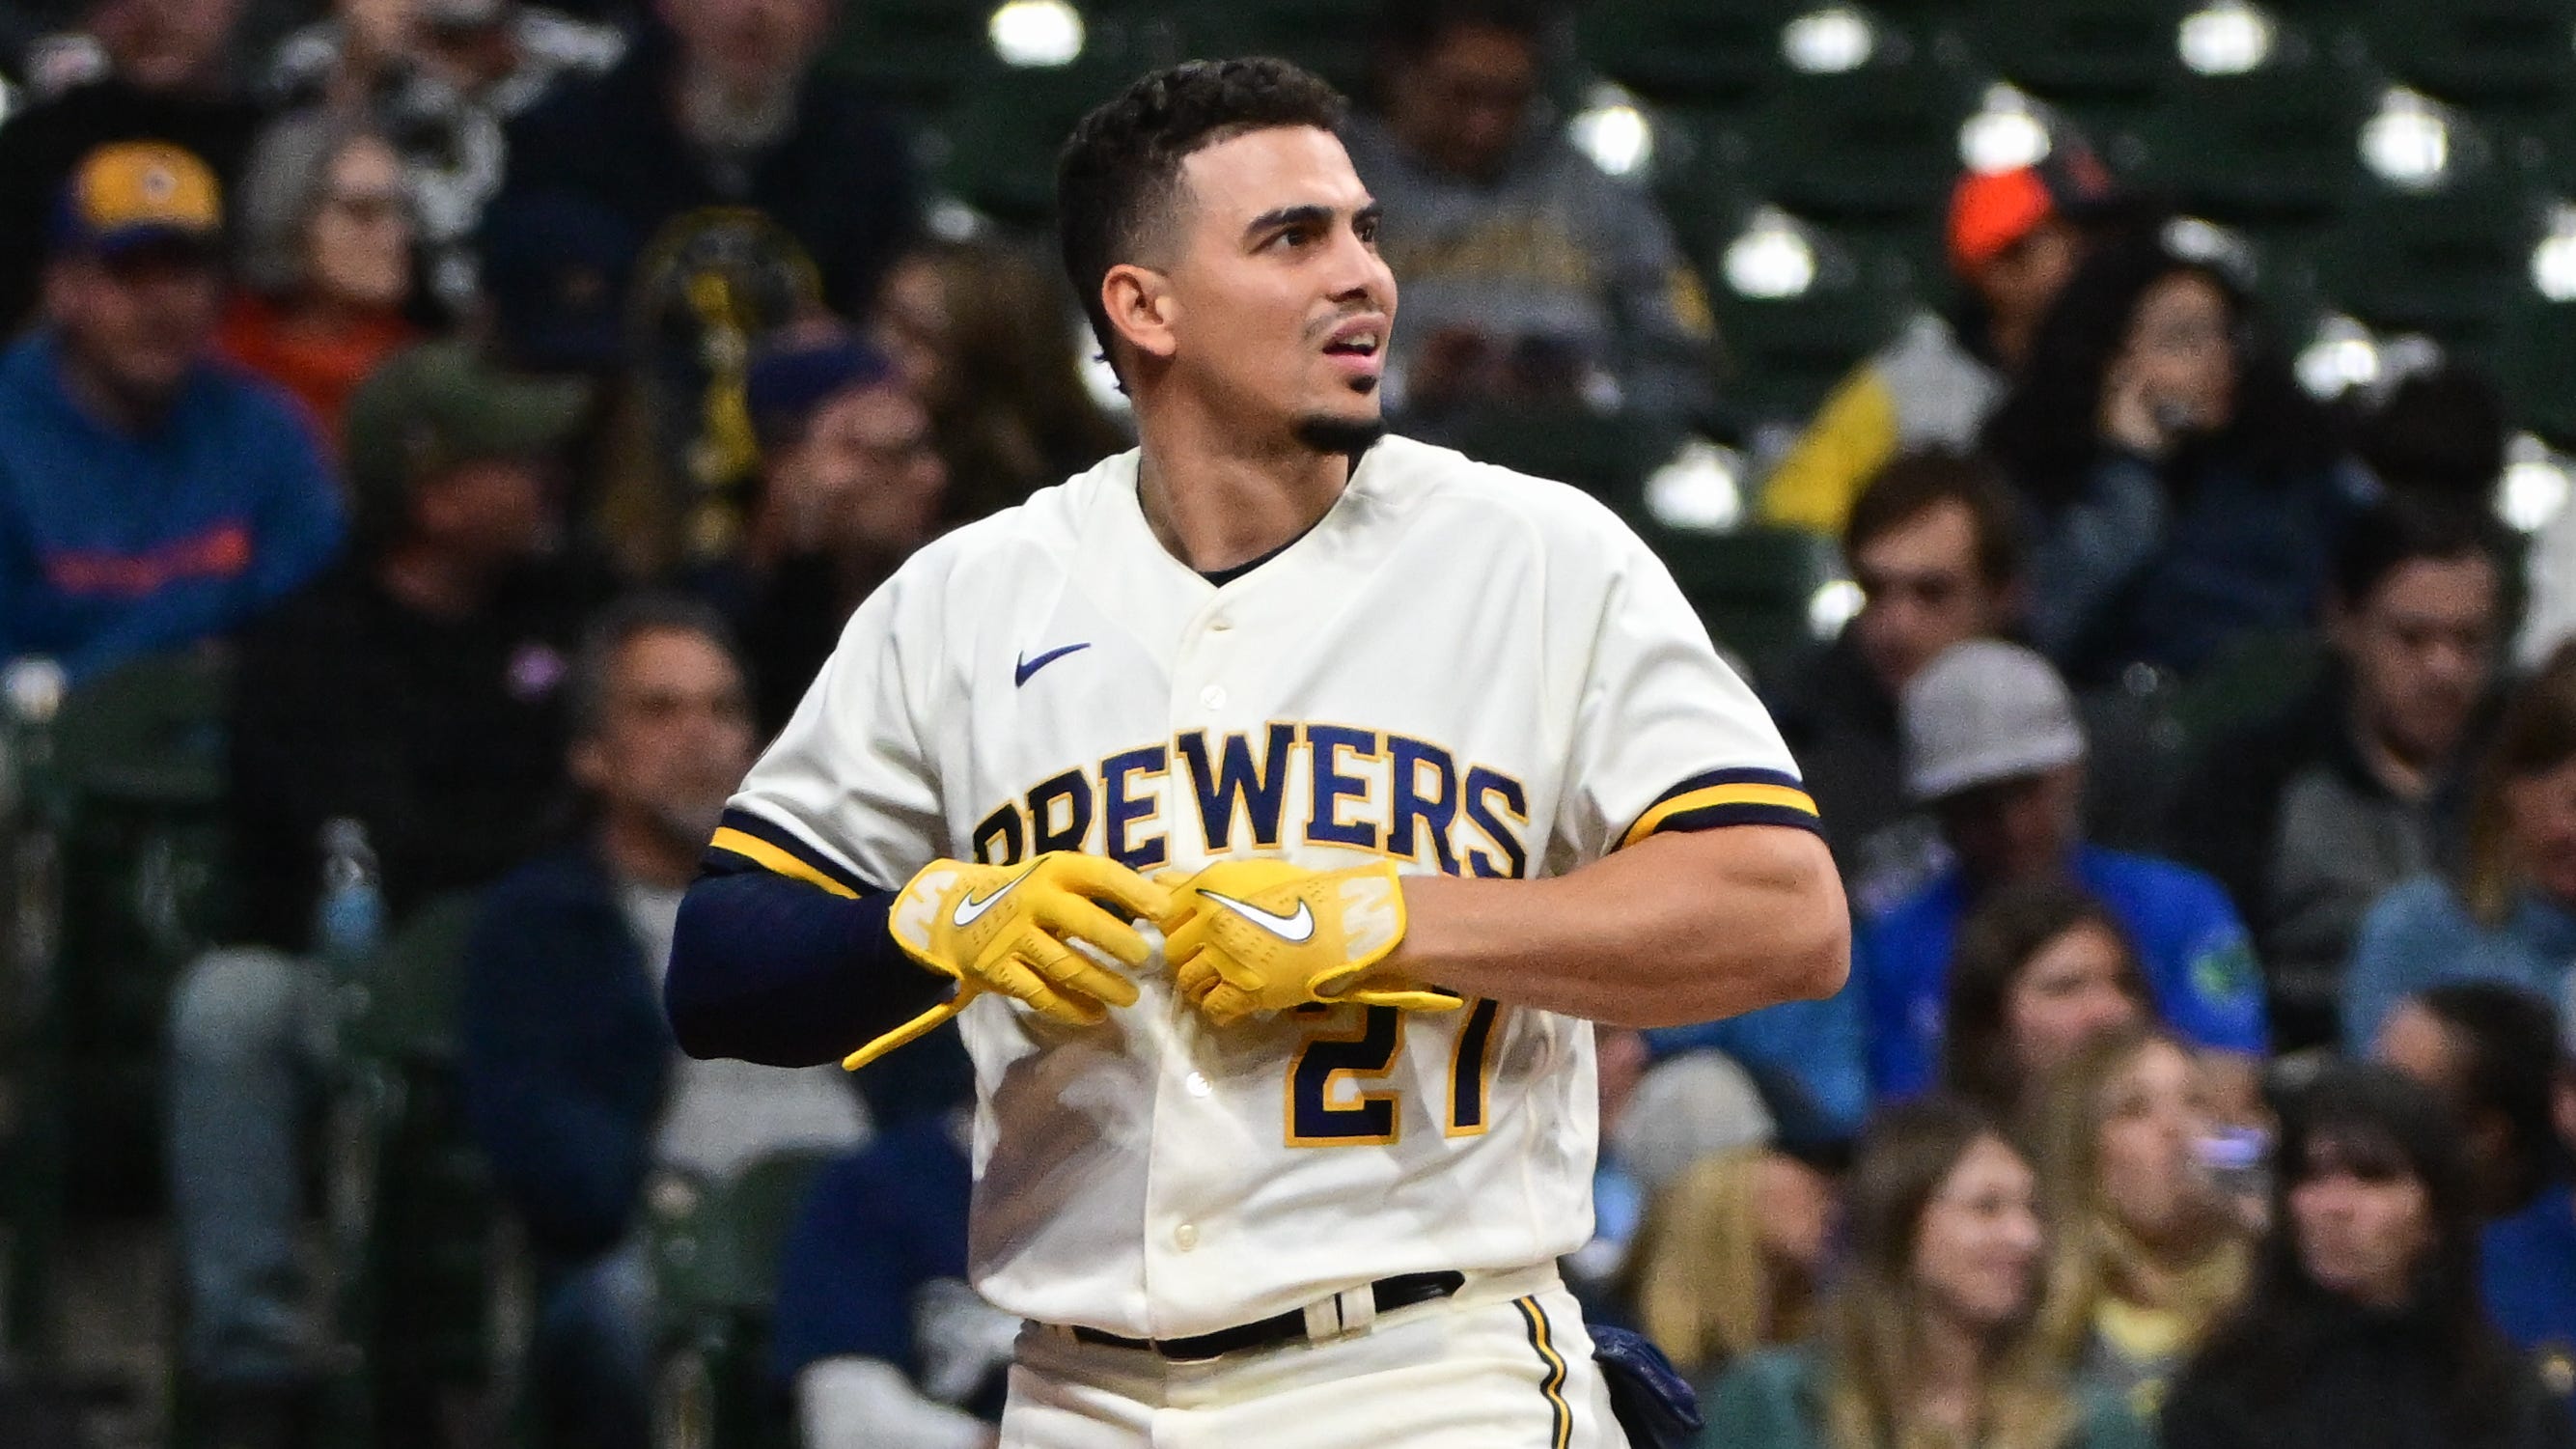 Brewers shortstop Willy Adames had to leave Friday night's game against the Giants after he was struck by a foul ball while in the dugout.